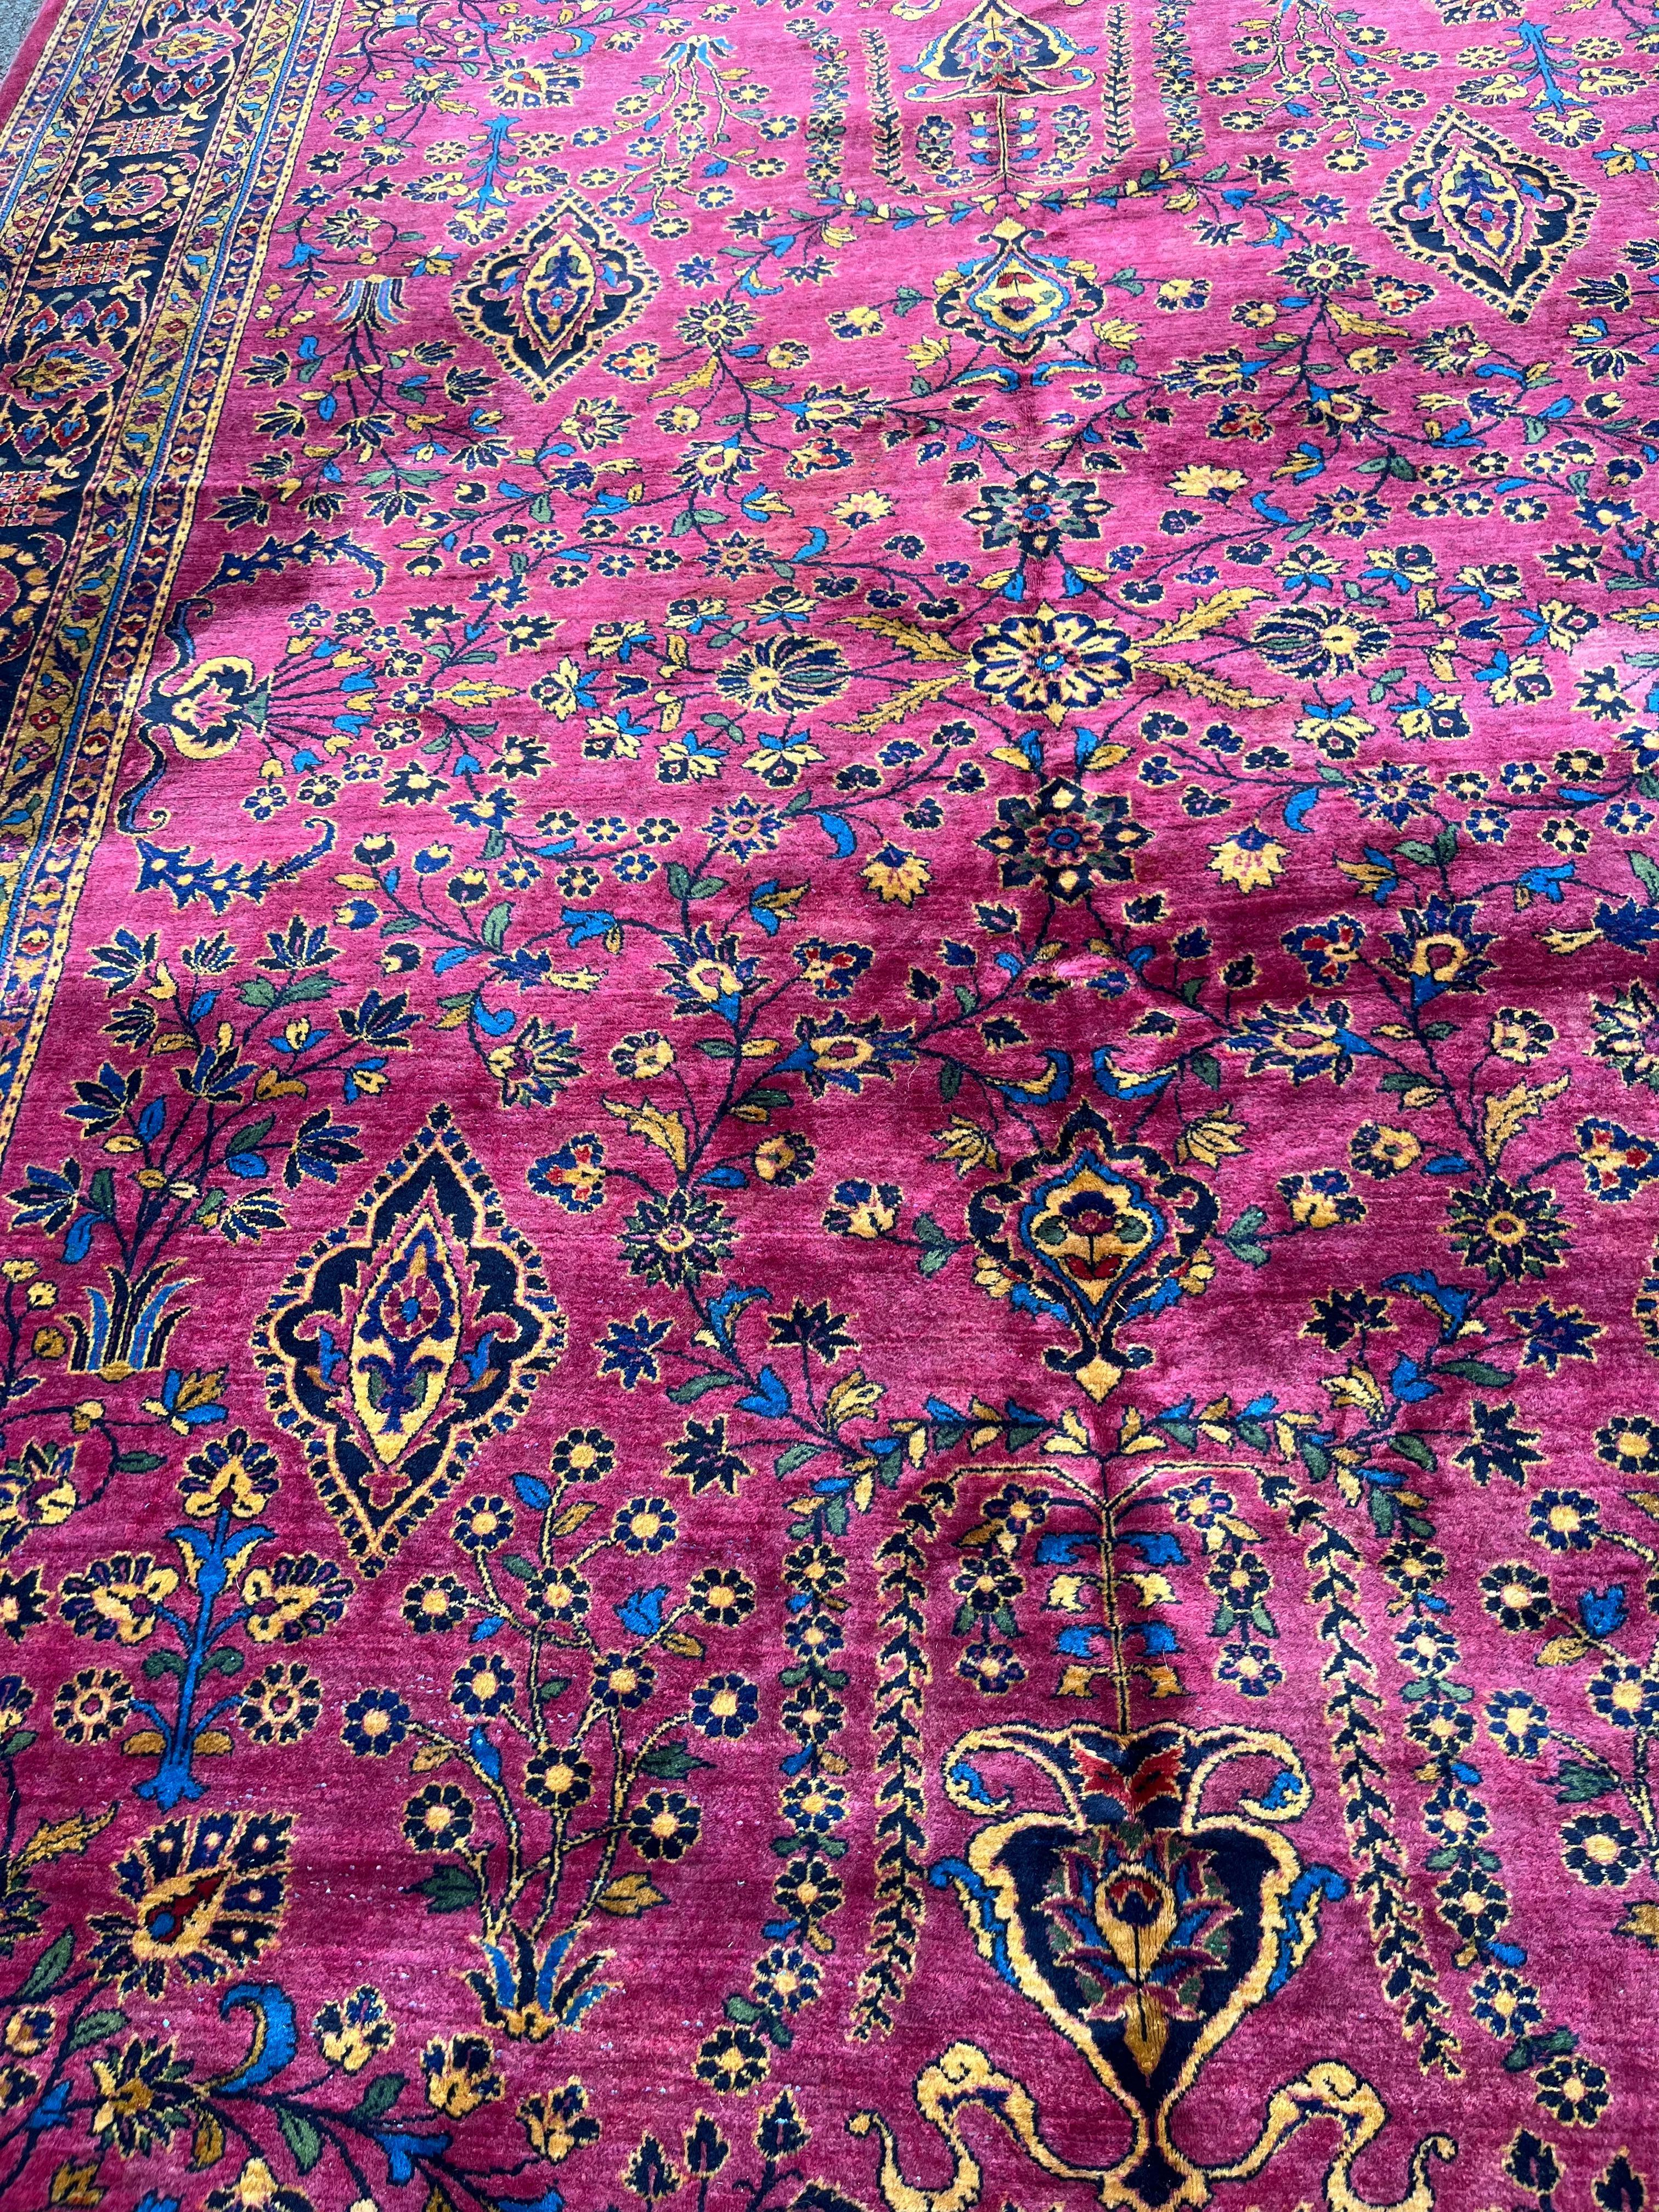 This roomsize, handknotted, antique, wool carpet from India has a striking wine field color and floral designs in rich complementary colors radiating an overall jewel tone. It was made in the famous Tuftanjian workshop in India. Tuftanjian emigrated